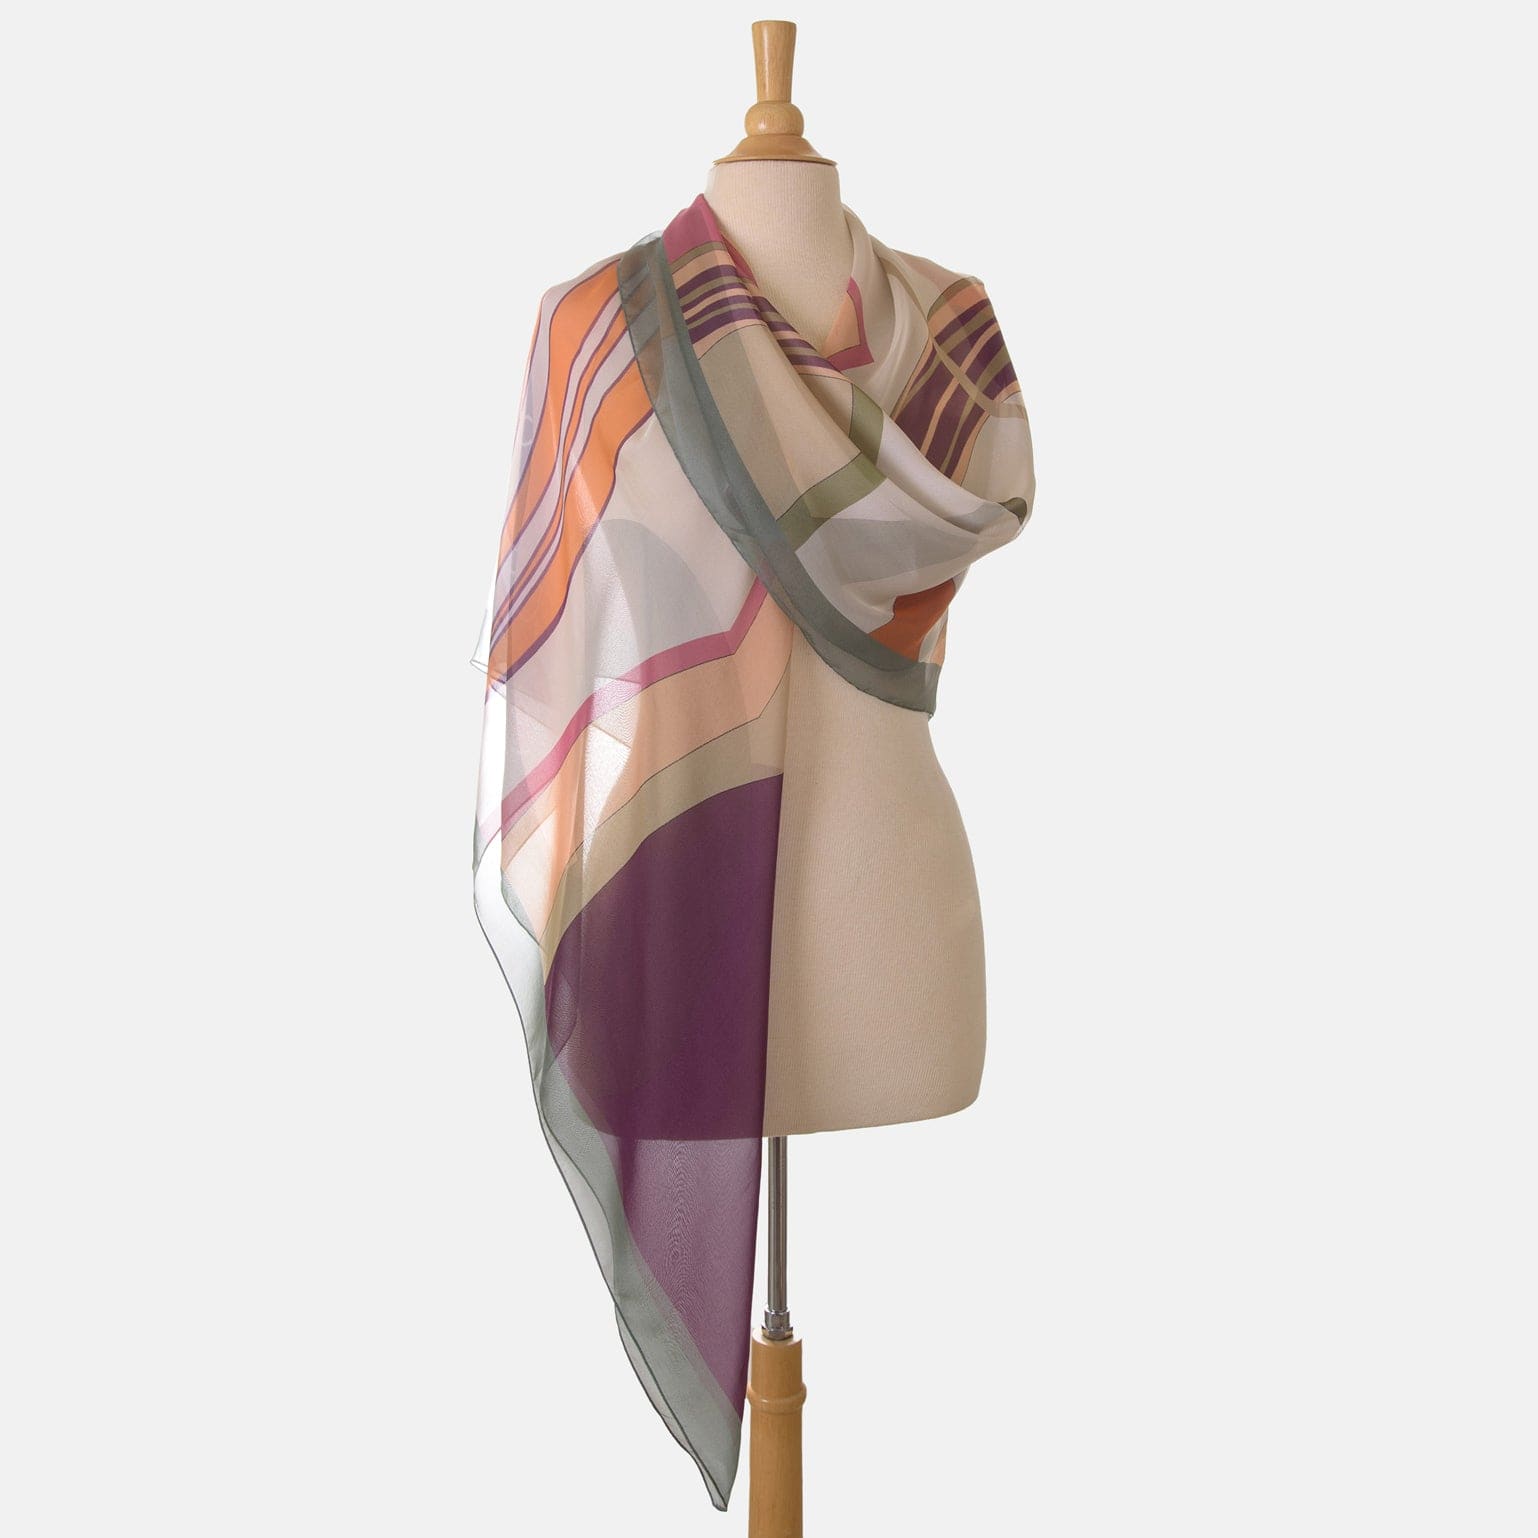 Millie & Boo Silk Scarf, Woman's 100% Silk Scarves Shawls and Wraps for  Evening Dresses